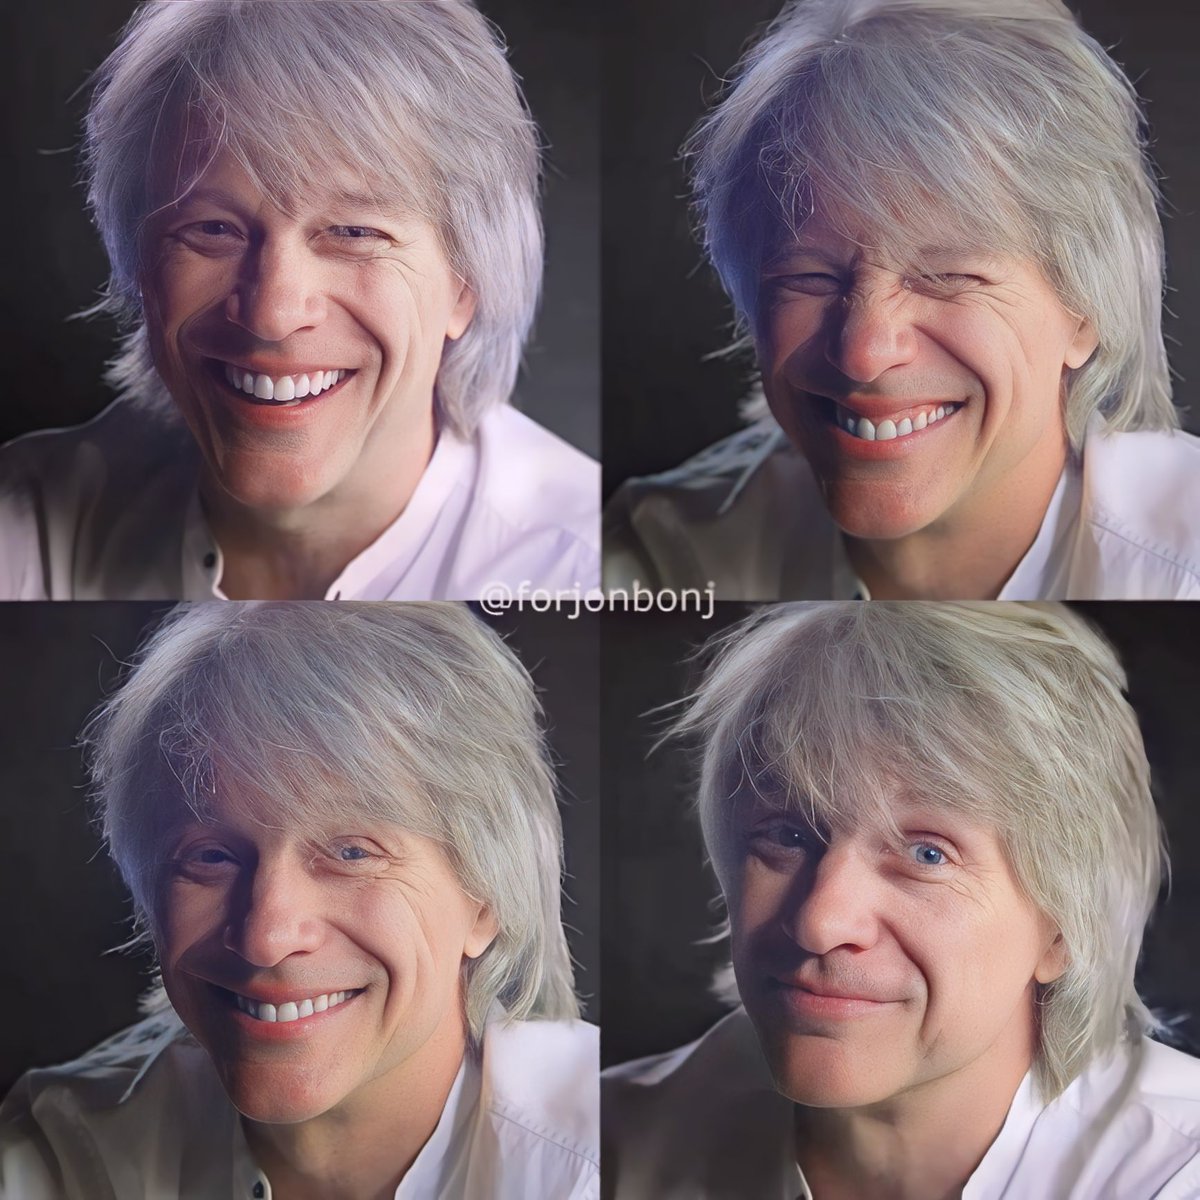 He is the cutest and I love him so much 🥹🤍 #jonbonjovi #ThankYouGoodnight